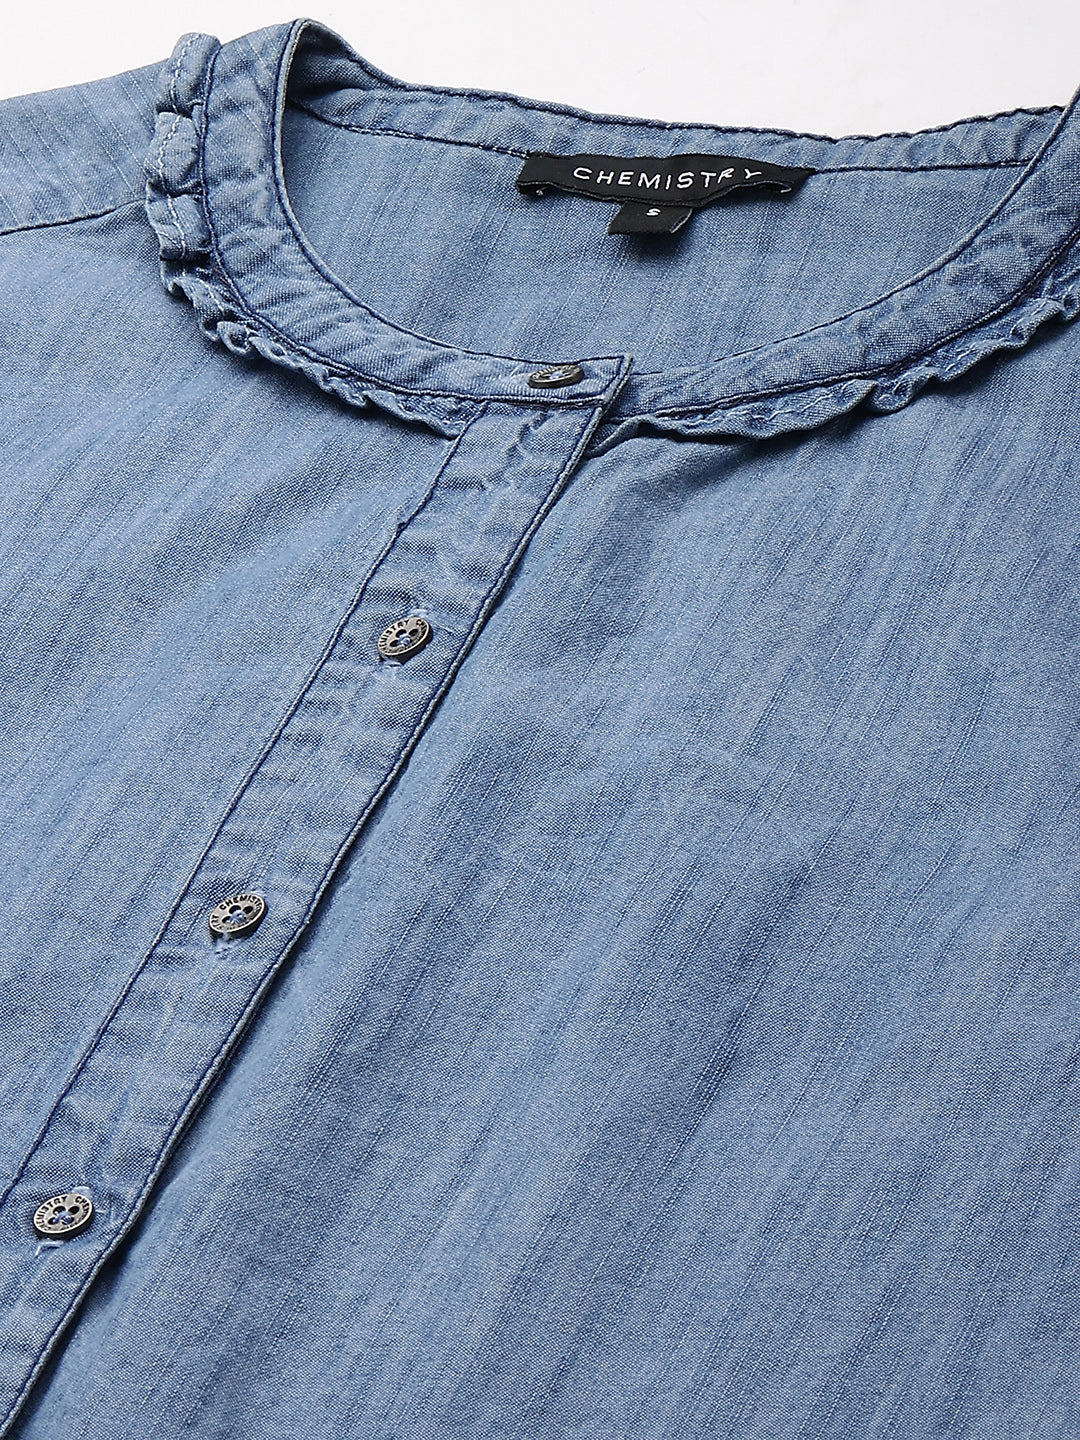 Mid Wash Blue, Light Weight Denim Full Sleeved Shirt With Frill Detailing Around Collar & Cuff